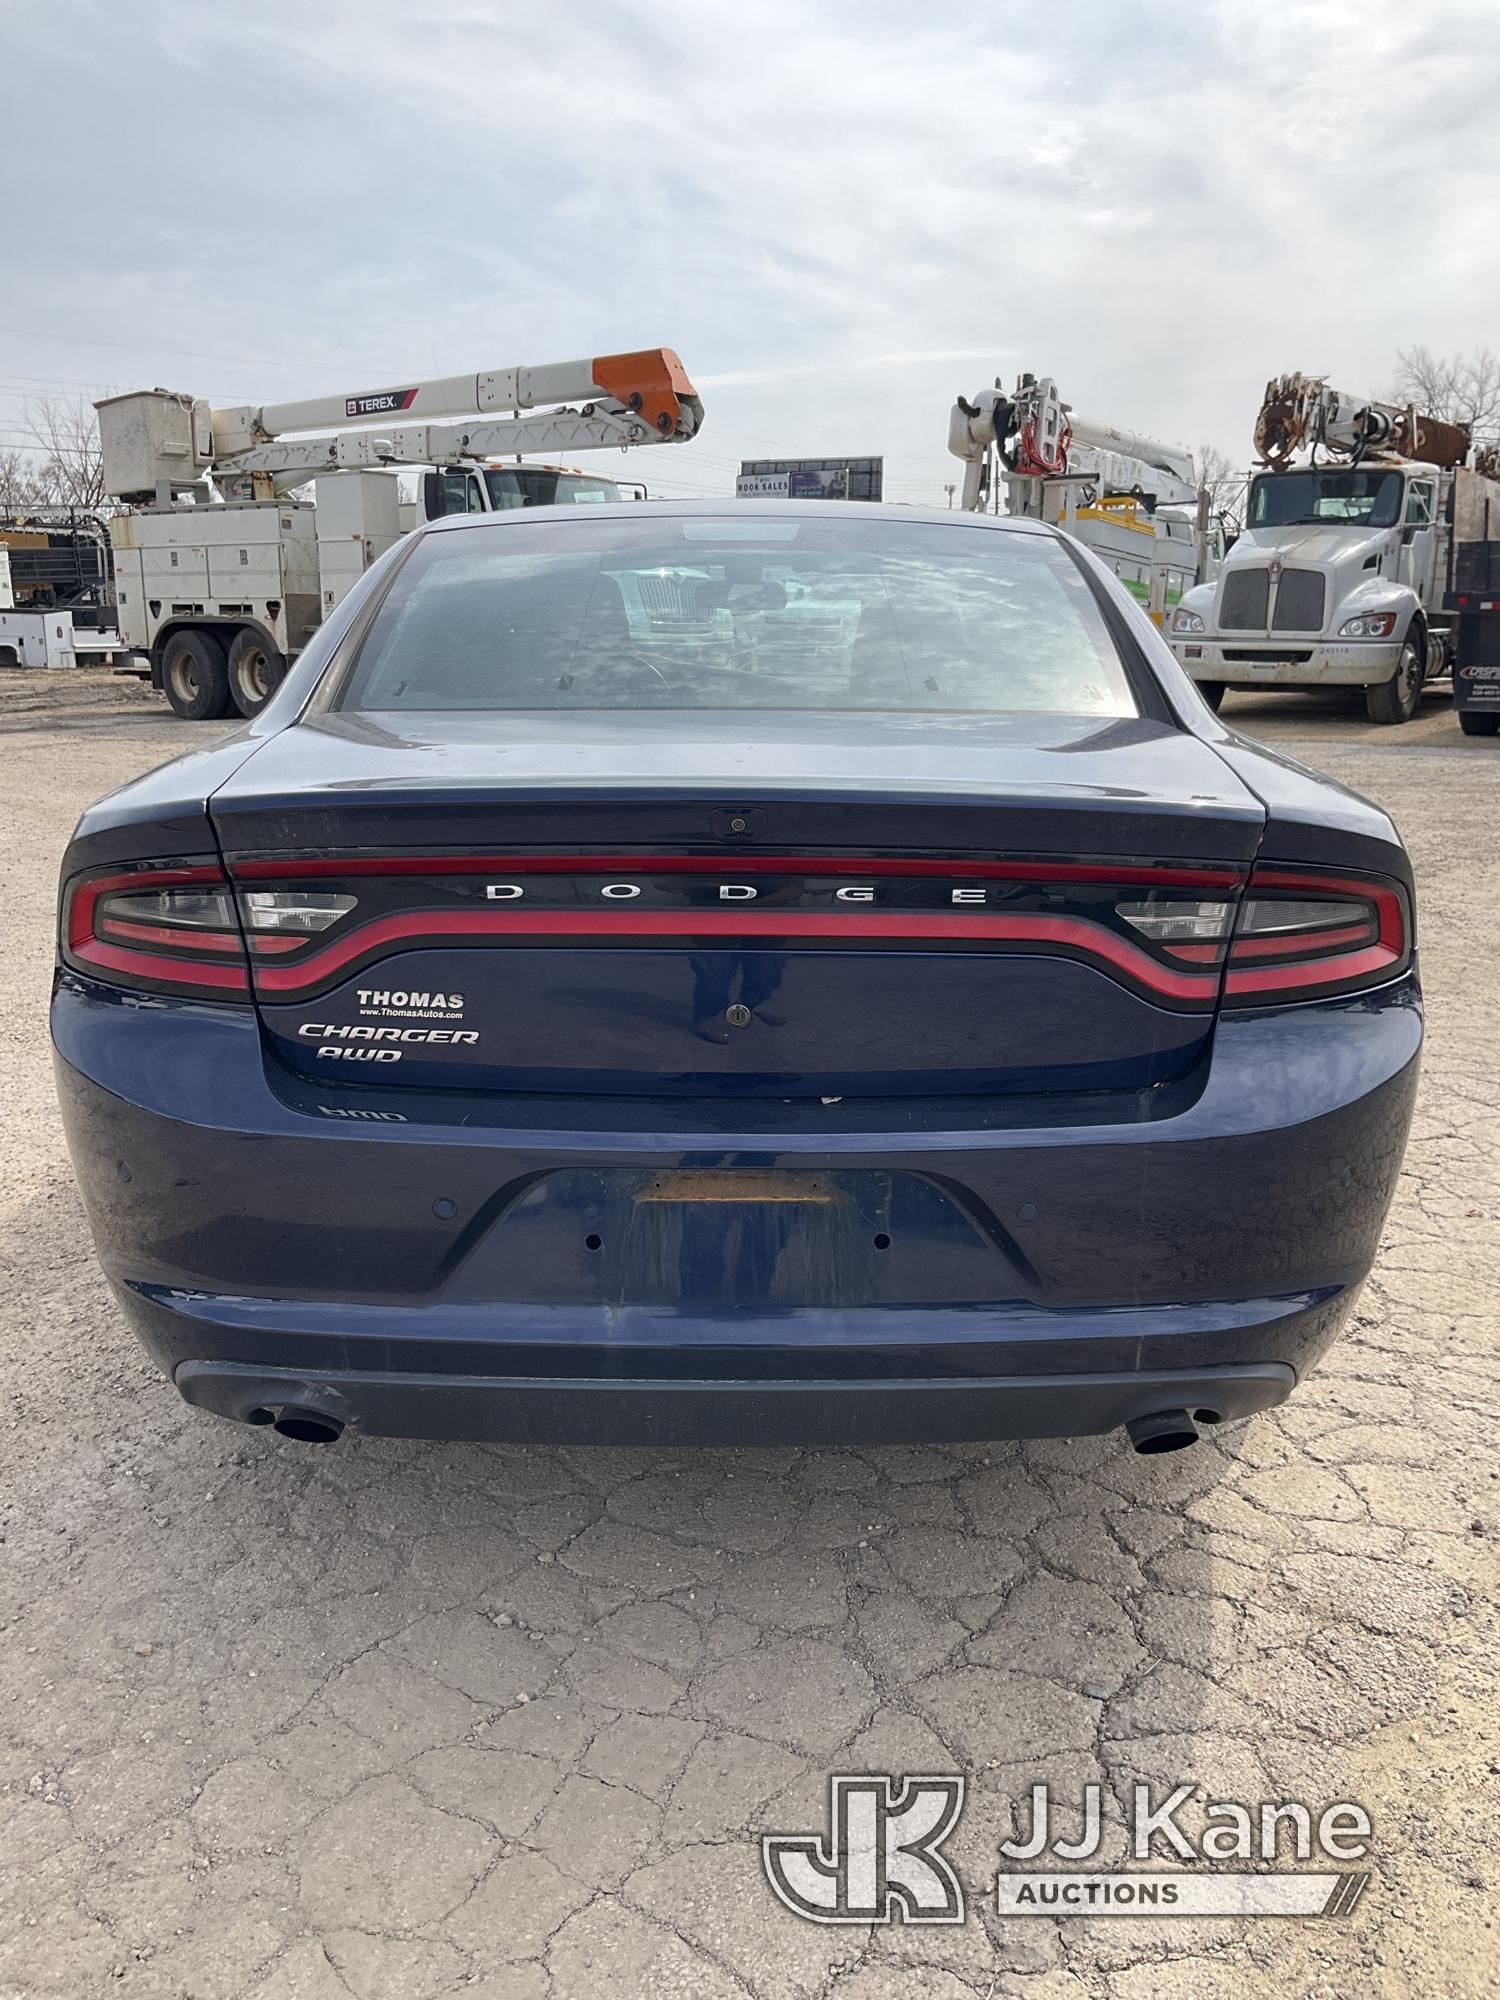 (South Beloit, IL) 2017 Dodge Charger Police Package 4-Door Sedan Runs, Moves, Roof Damage